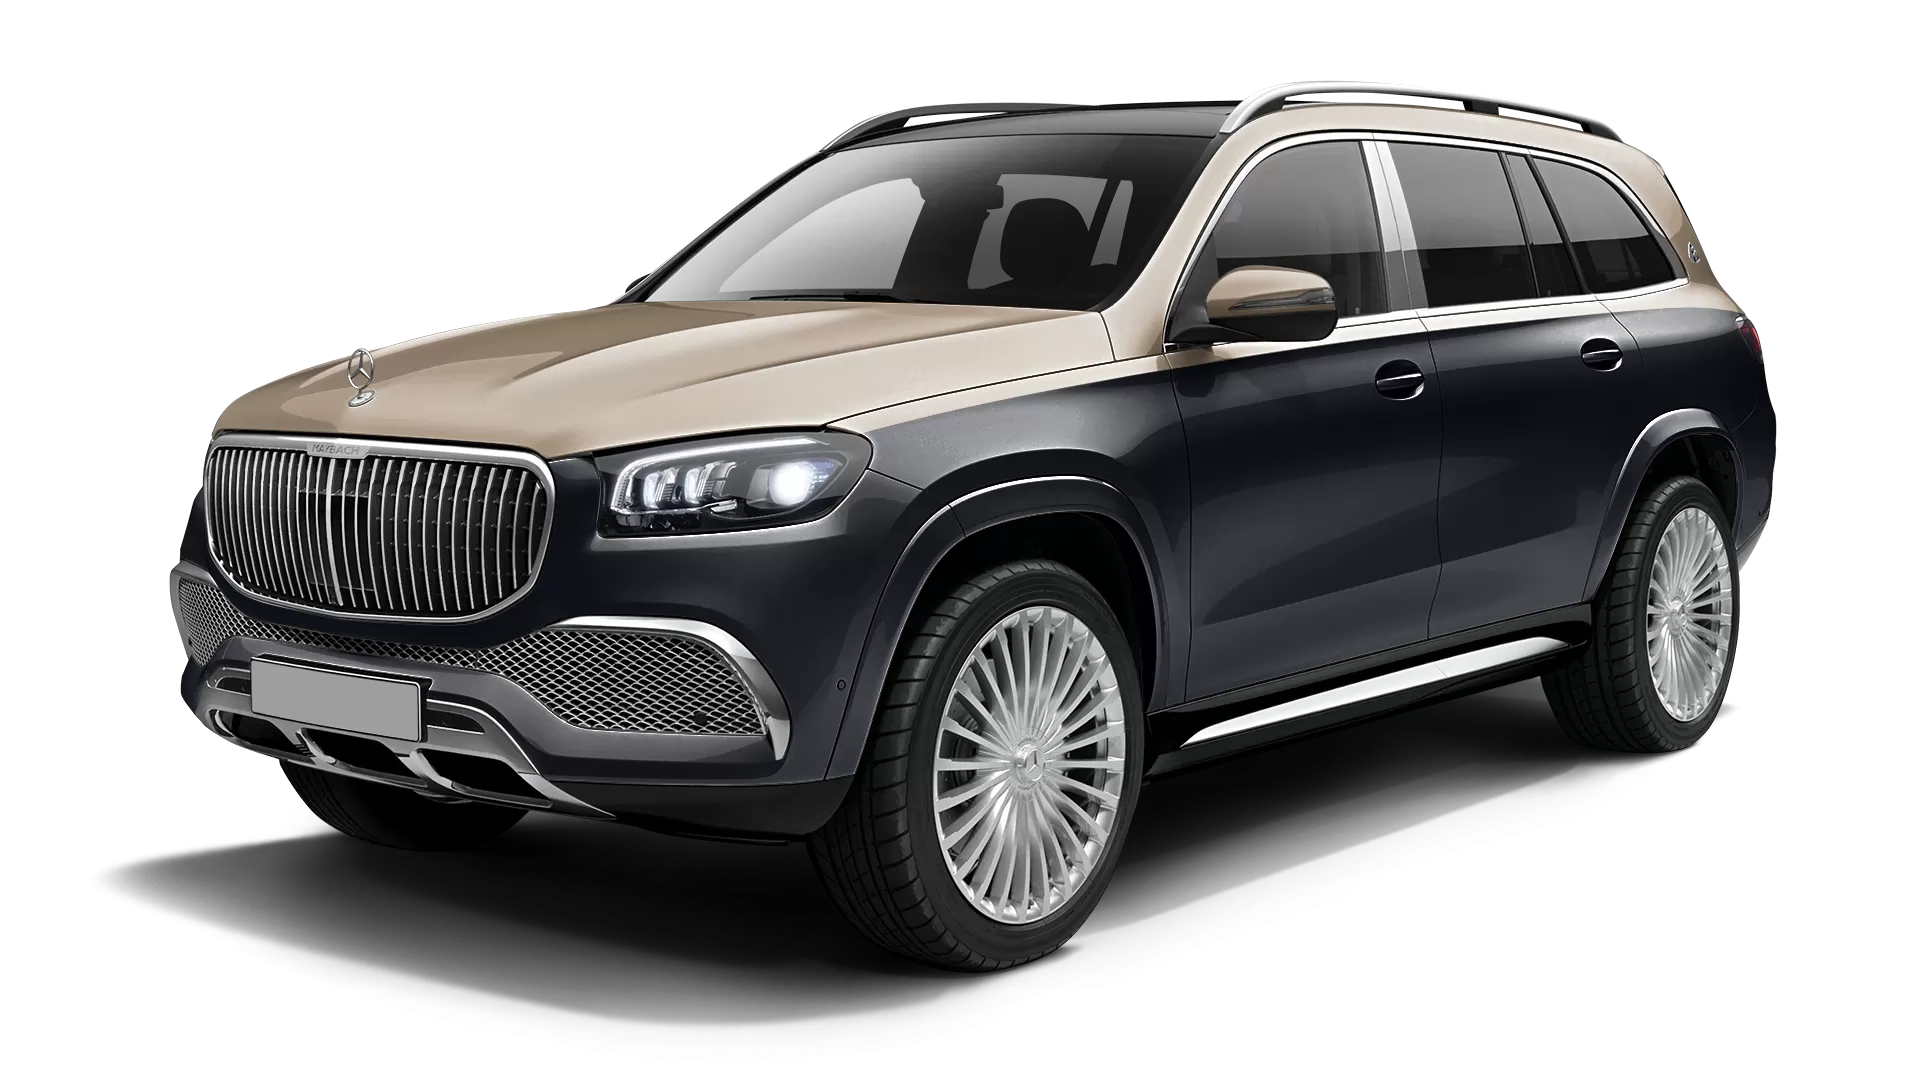 Mercedes Maybach GLS 600 stock front view in Obsidian Black & Kalahari Gold color